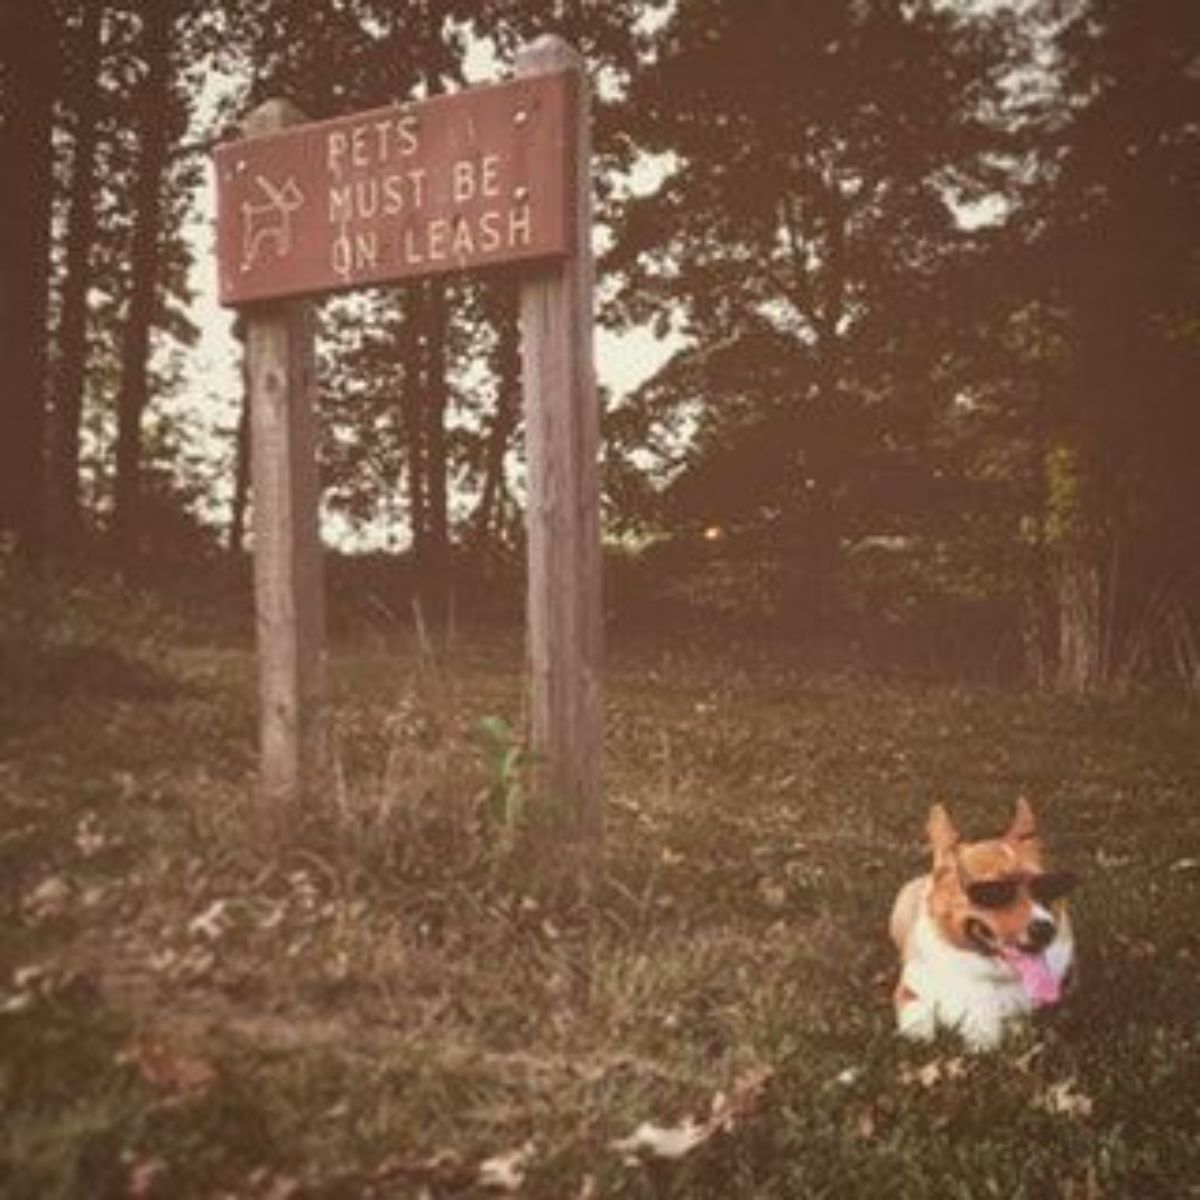 brown and white corgi wearing black sunglasses laying on the ground of a forest next to a PETS MUST BE ON A LEASH sign